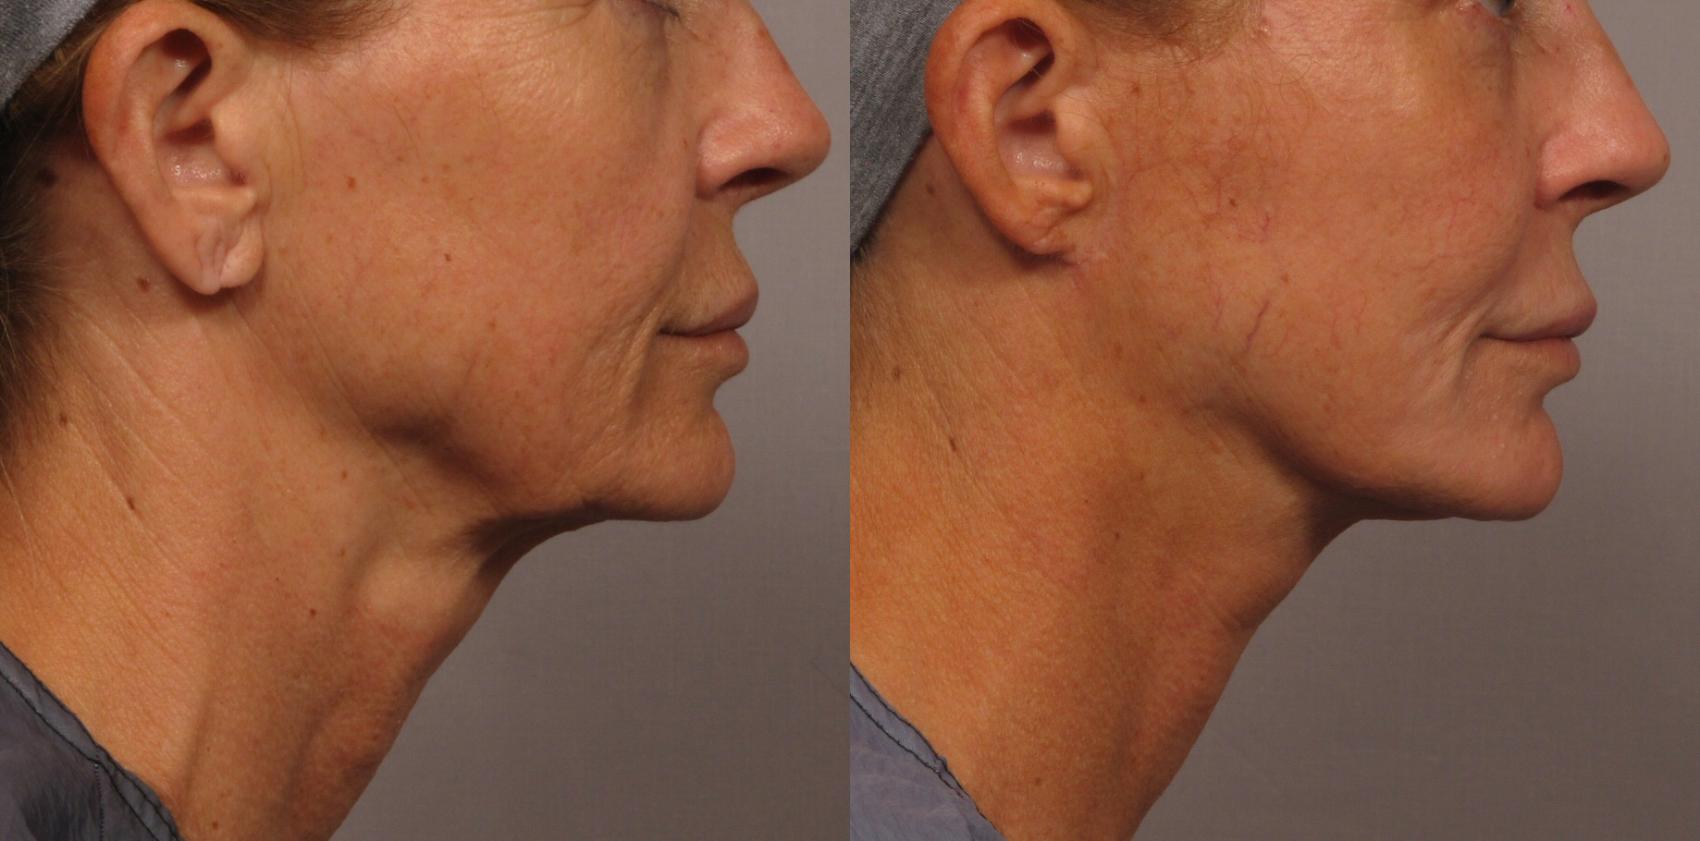 Endoscopic Facelift Naples, FL - Face Lift Near Me in Fort Myers